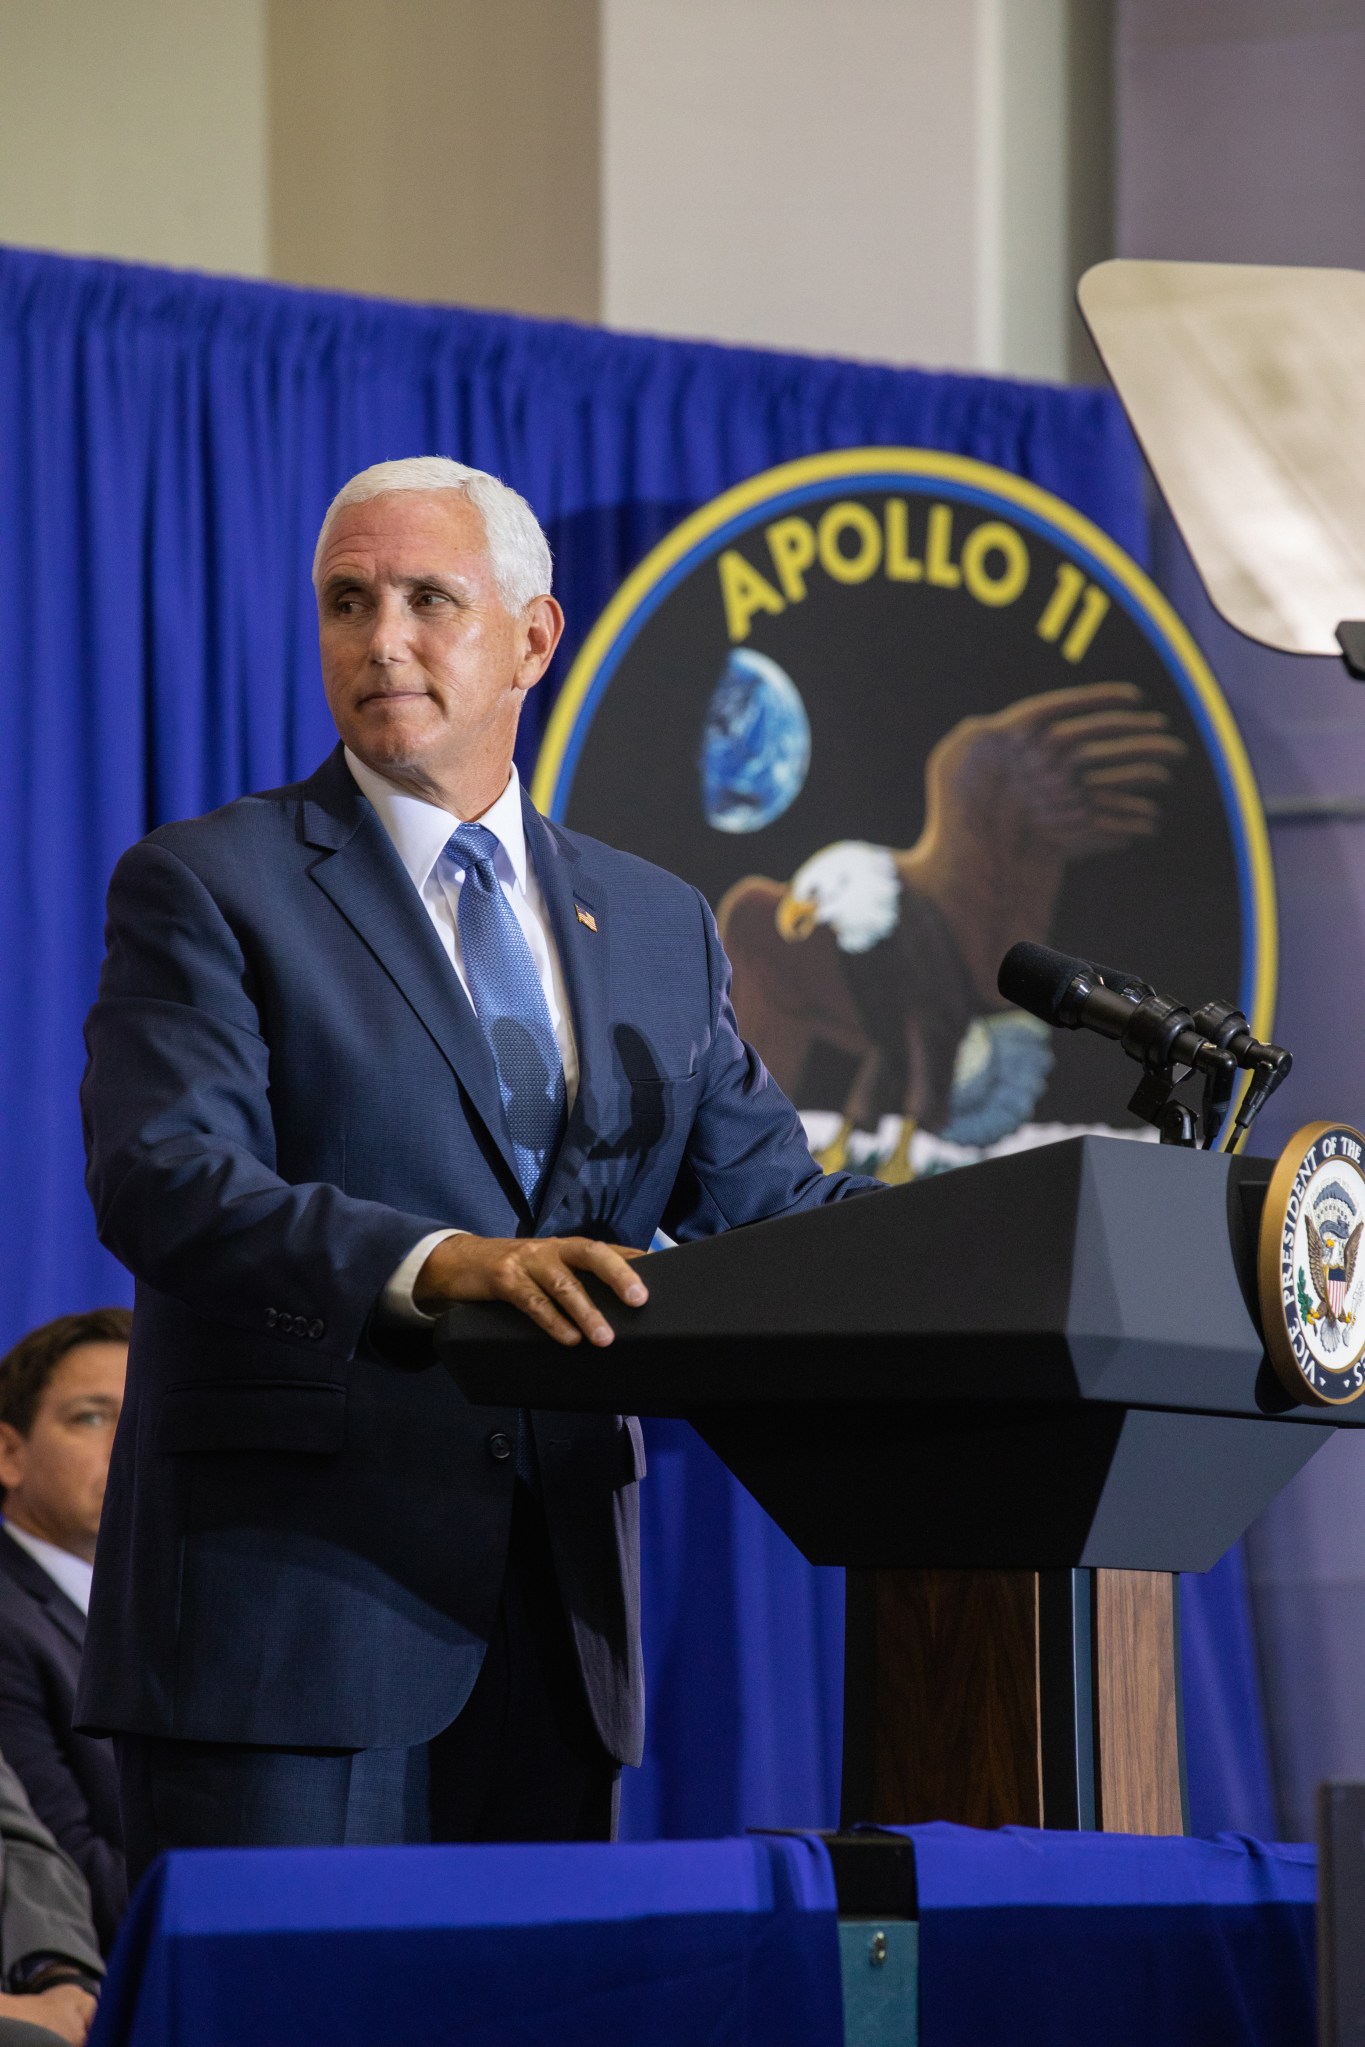 Mike Pence speaking at Kennedy Space Center July 20, 2019